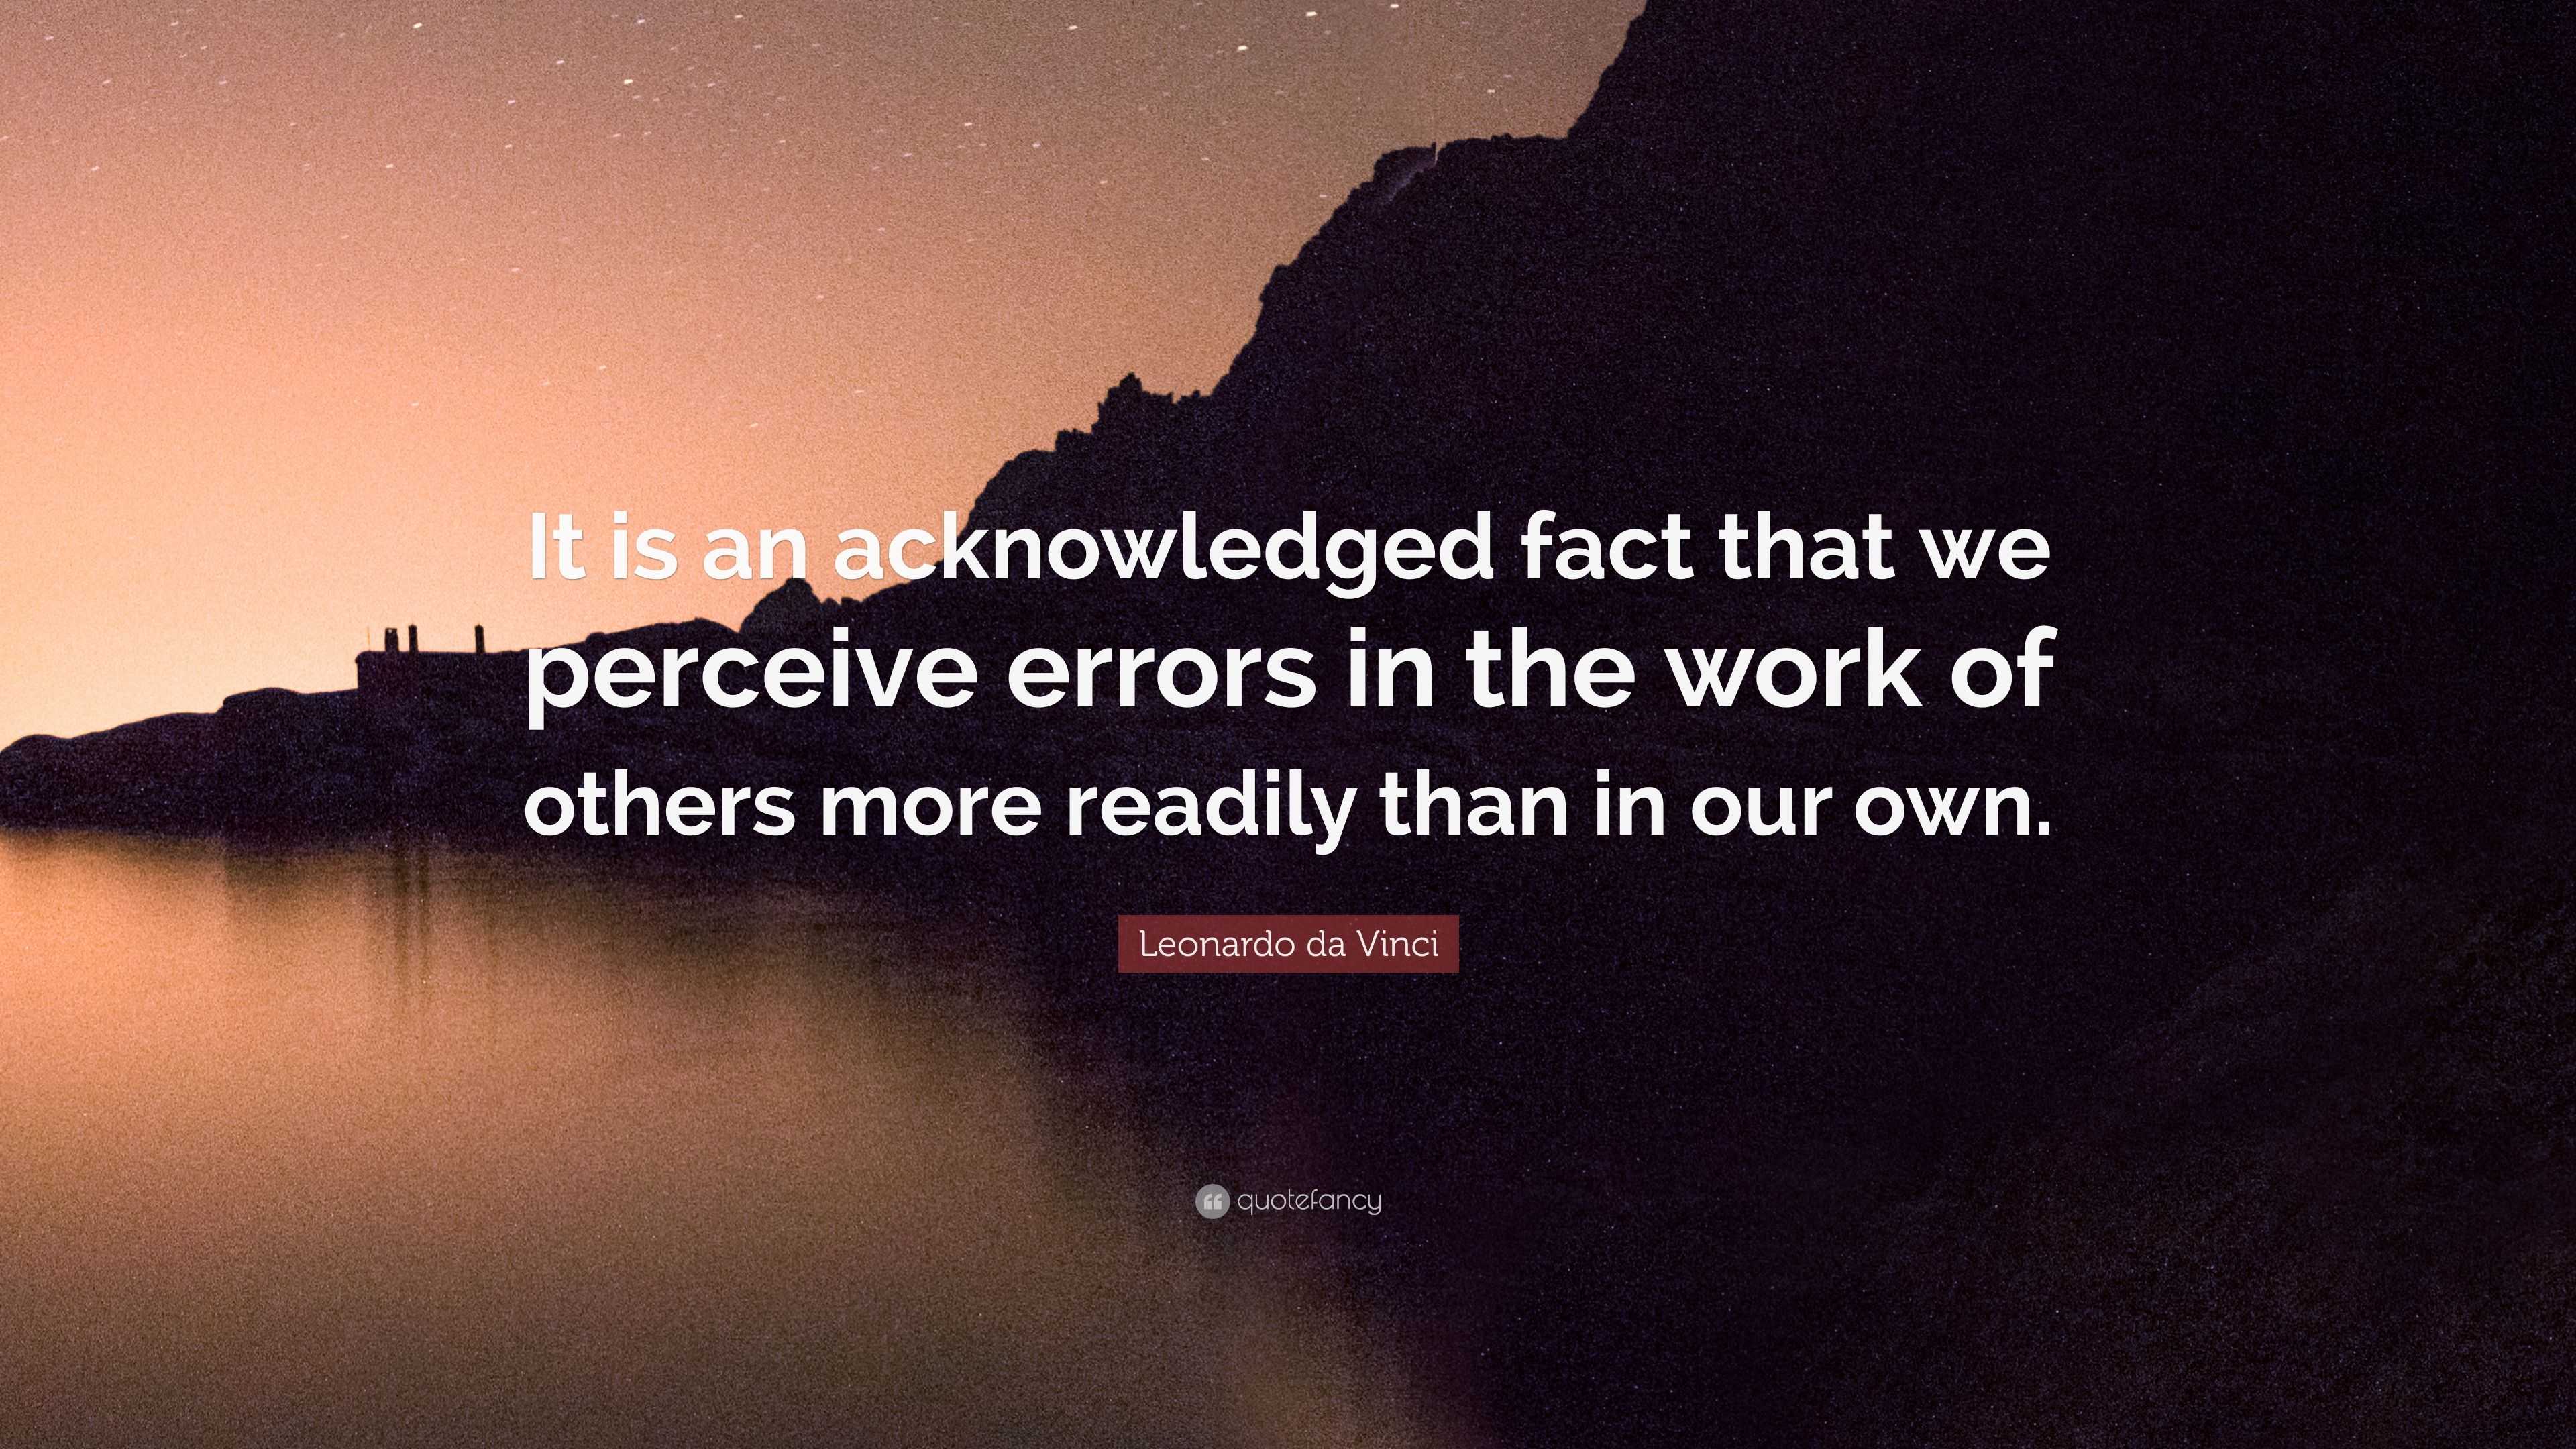 Leonardo da Vinci Quote: “It is an acknowledged fact that we perceive